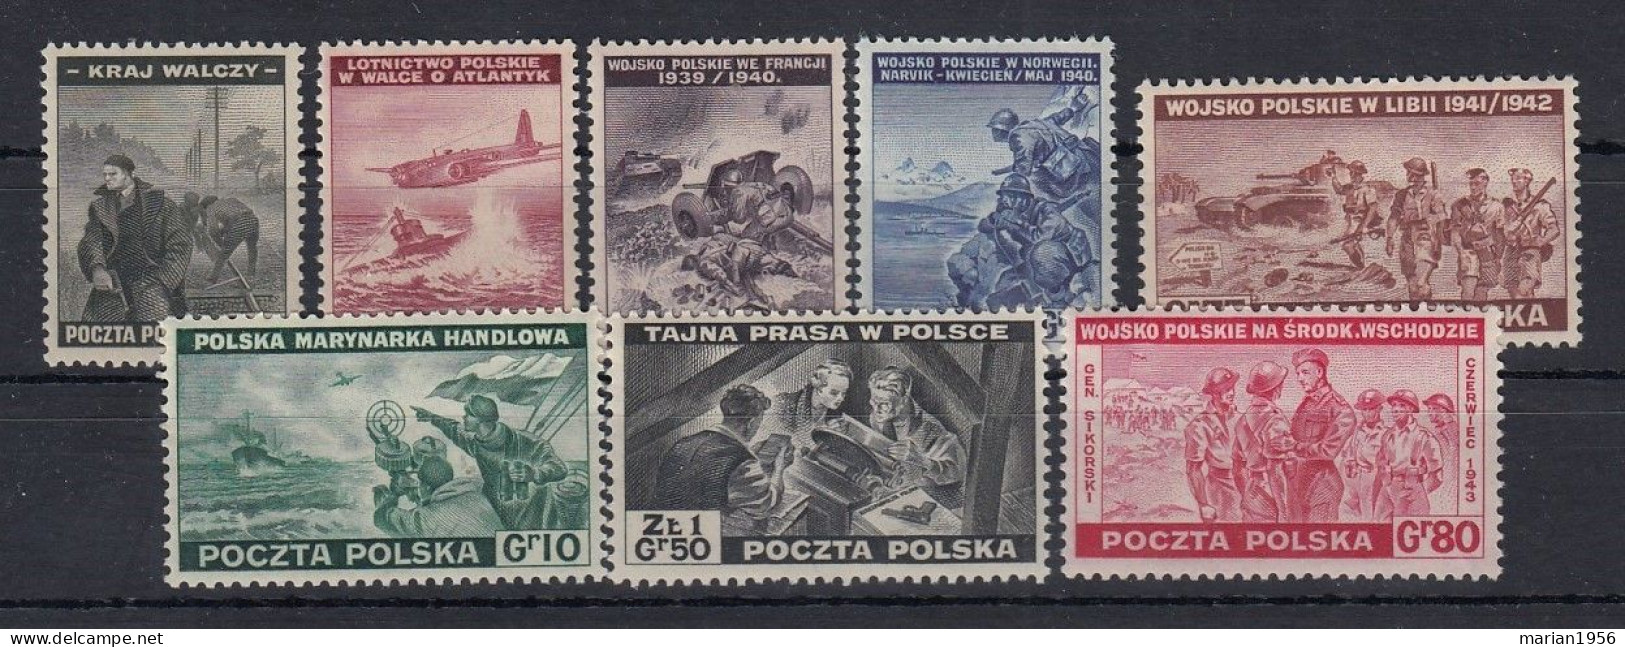 Pologne 1943 - Guerre - WWII - GOVERNMENT In EXILE (LONDON) - ARMEE POLONAISE -Mich. 368/75 - MNH - Gobierno De Londres (En Exhilio)